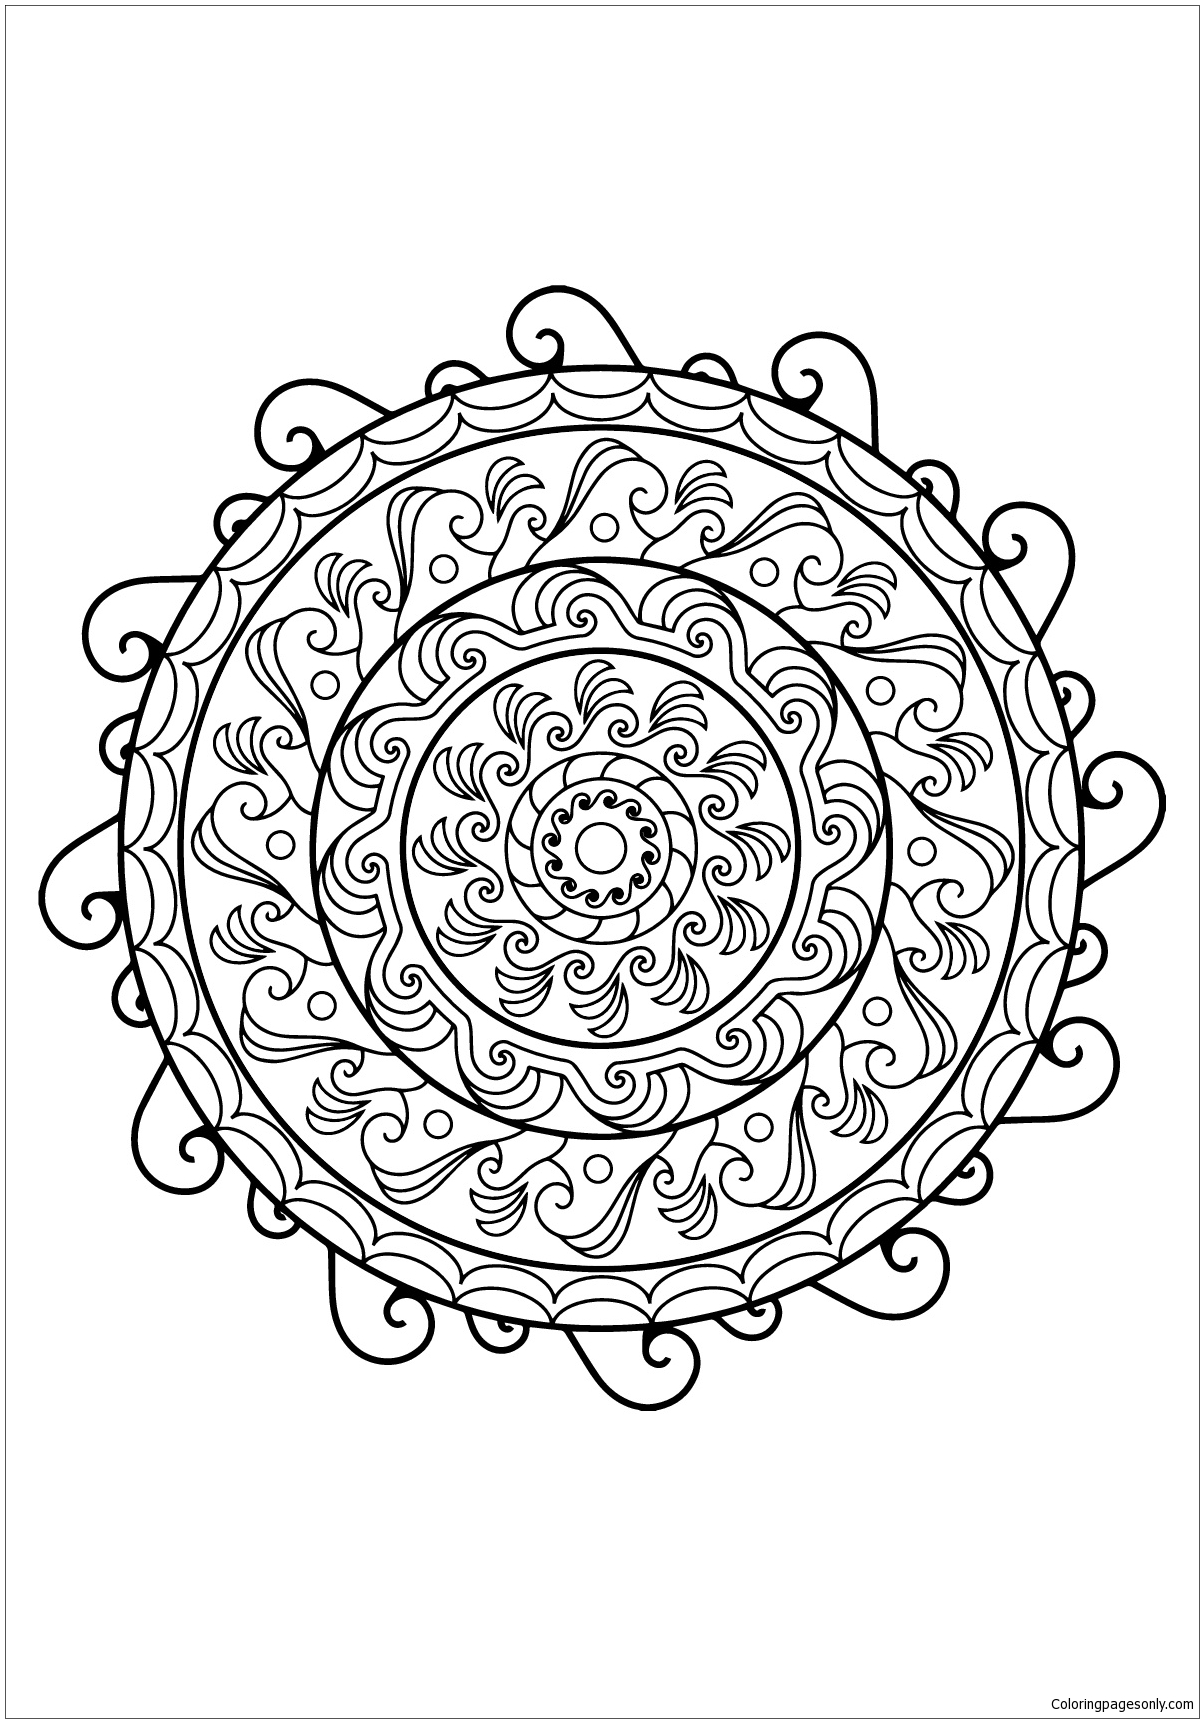 Mandala For Adults 1 Coloring Pages